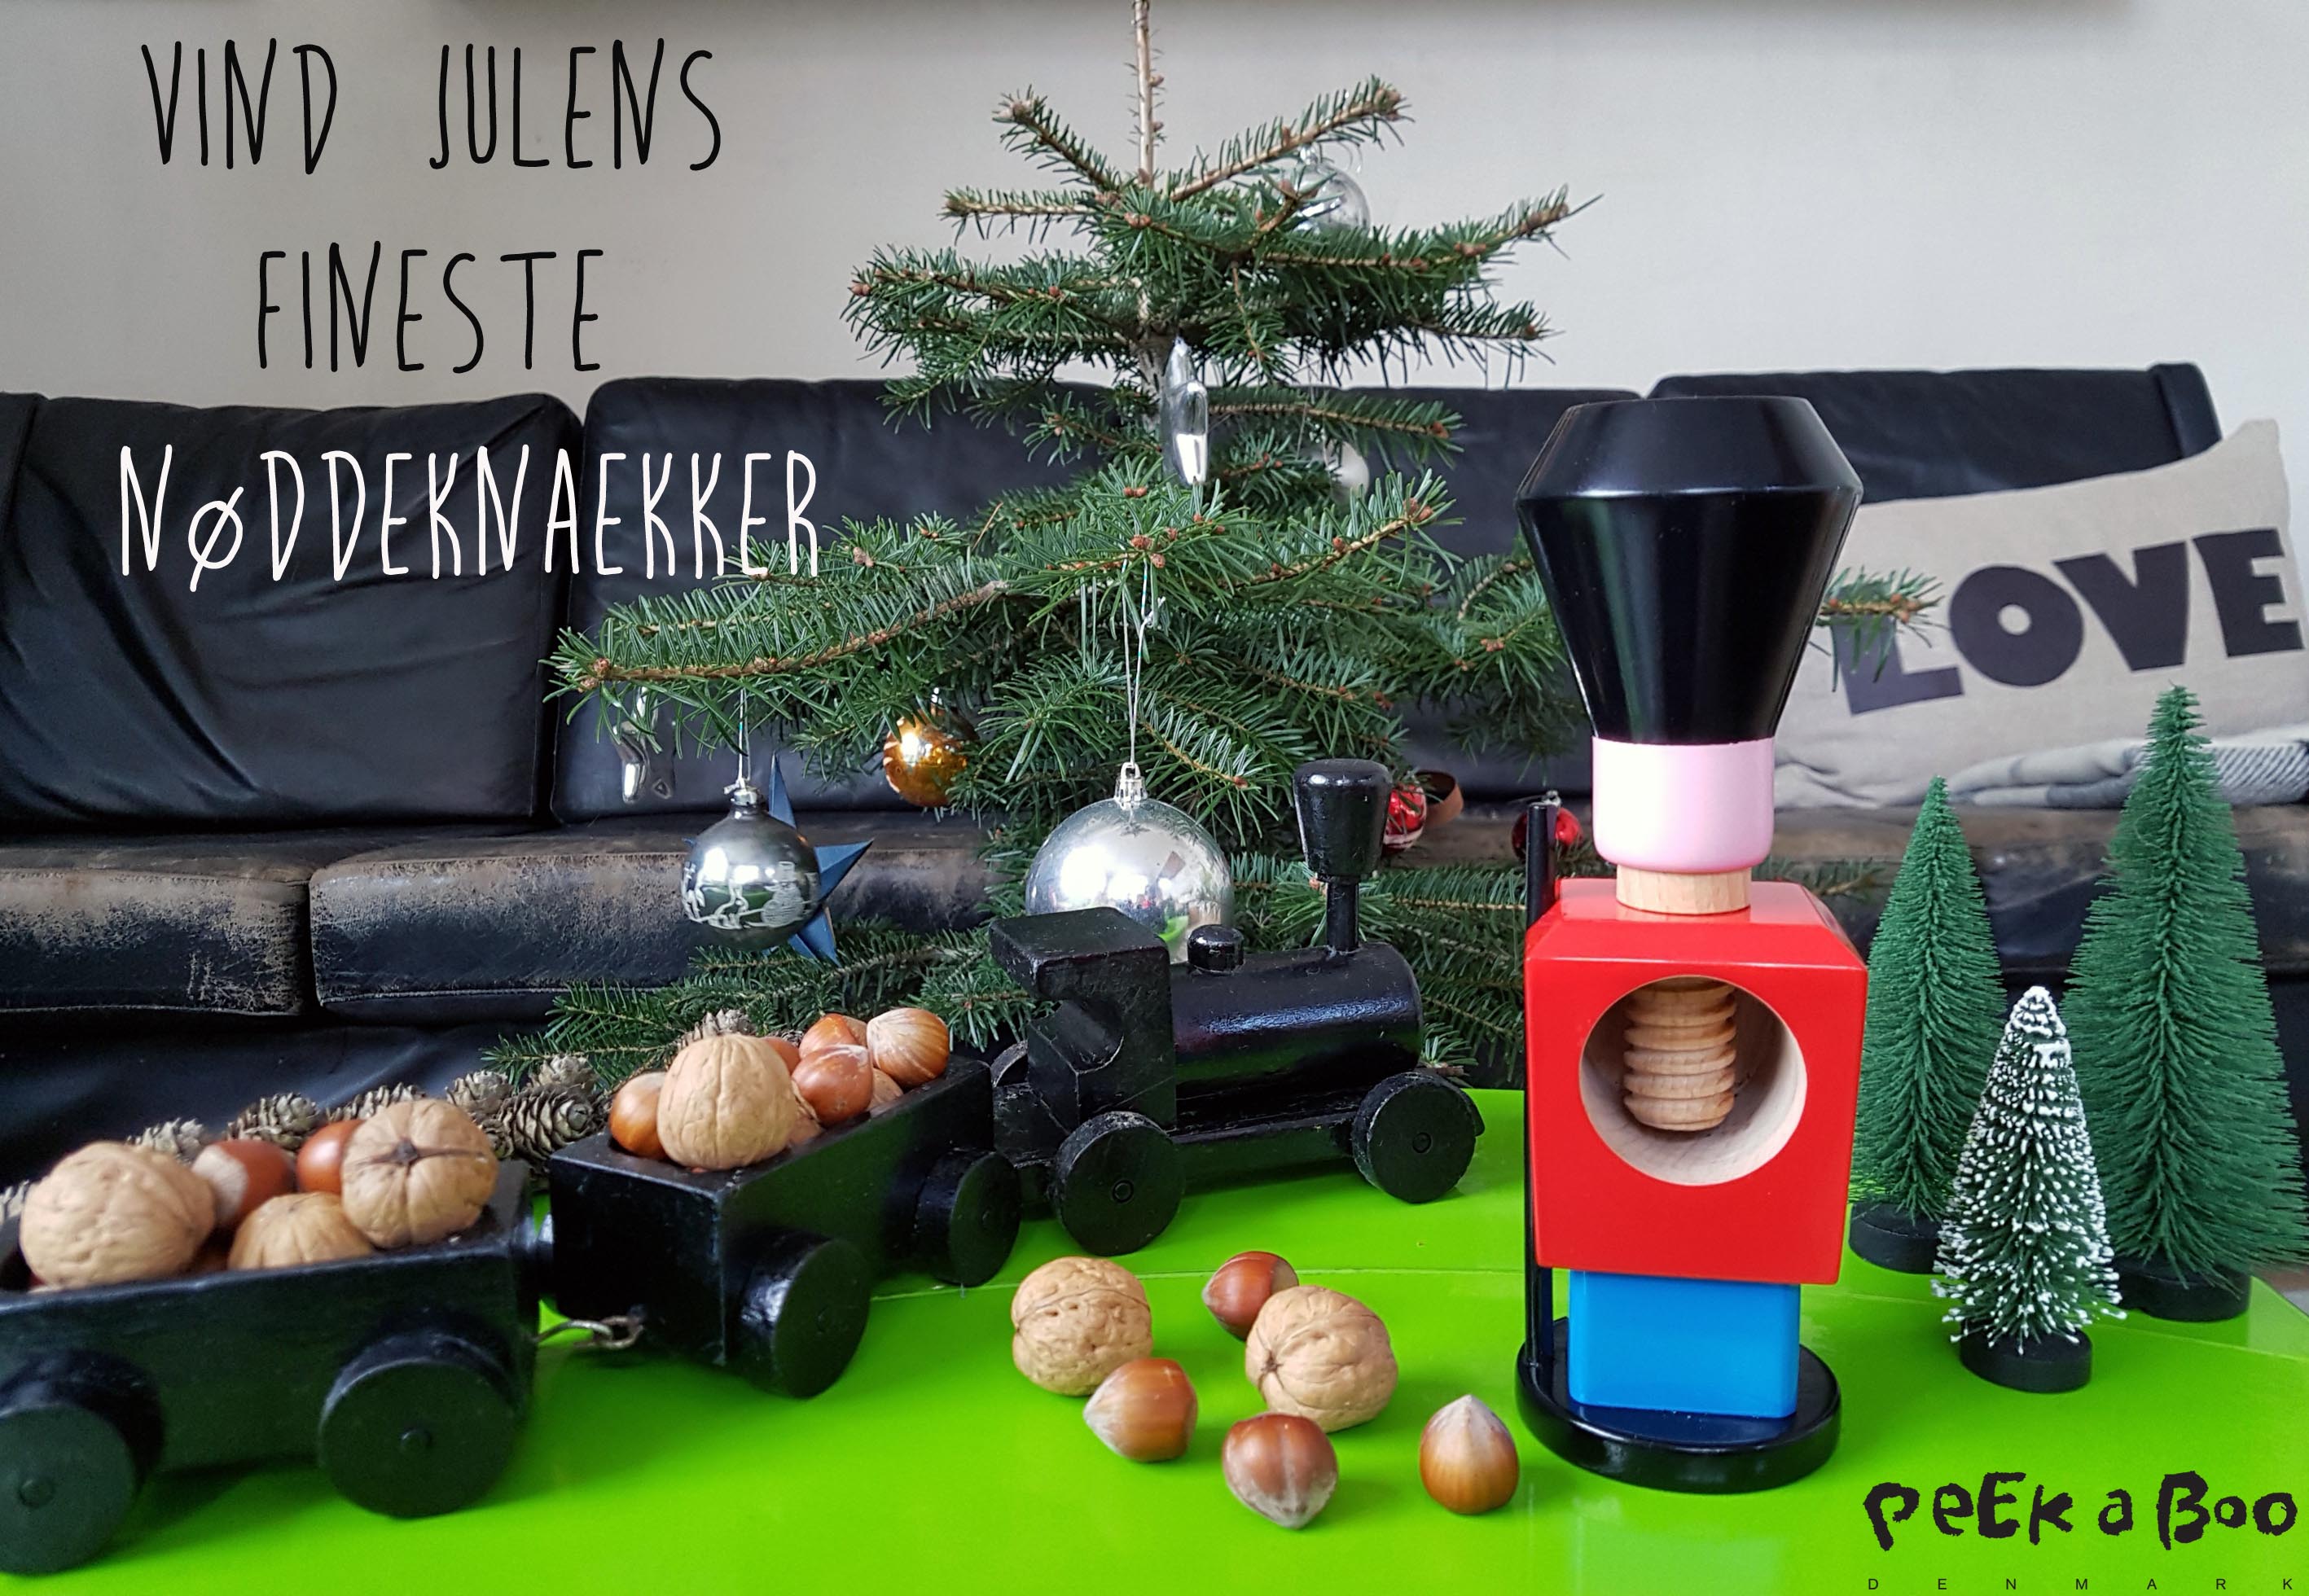 Win this sweet nutcracker from Spring Collection.